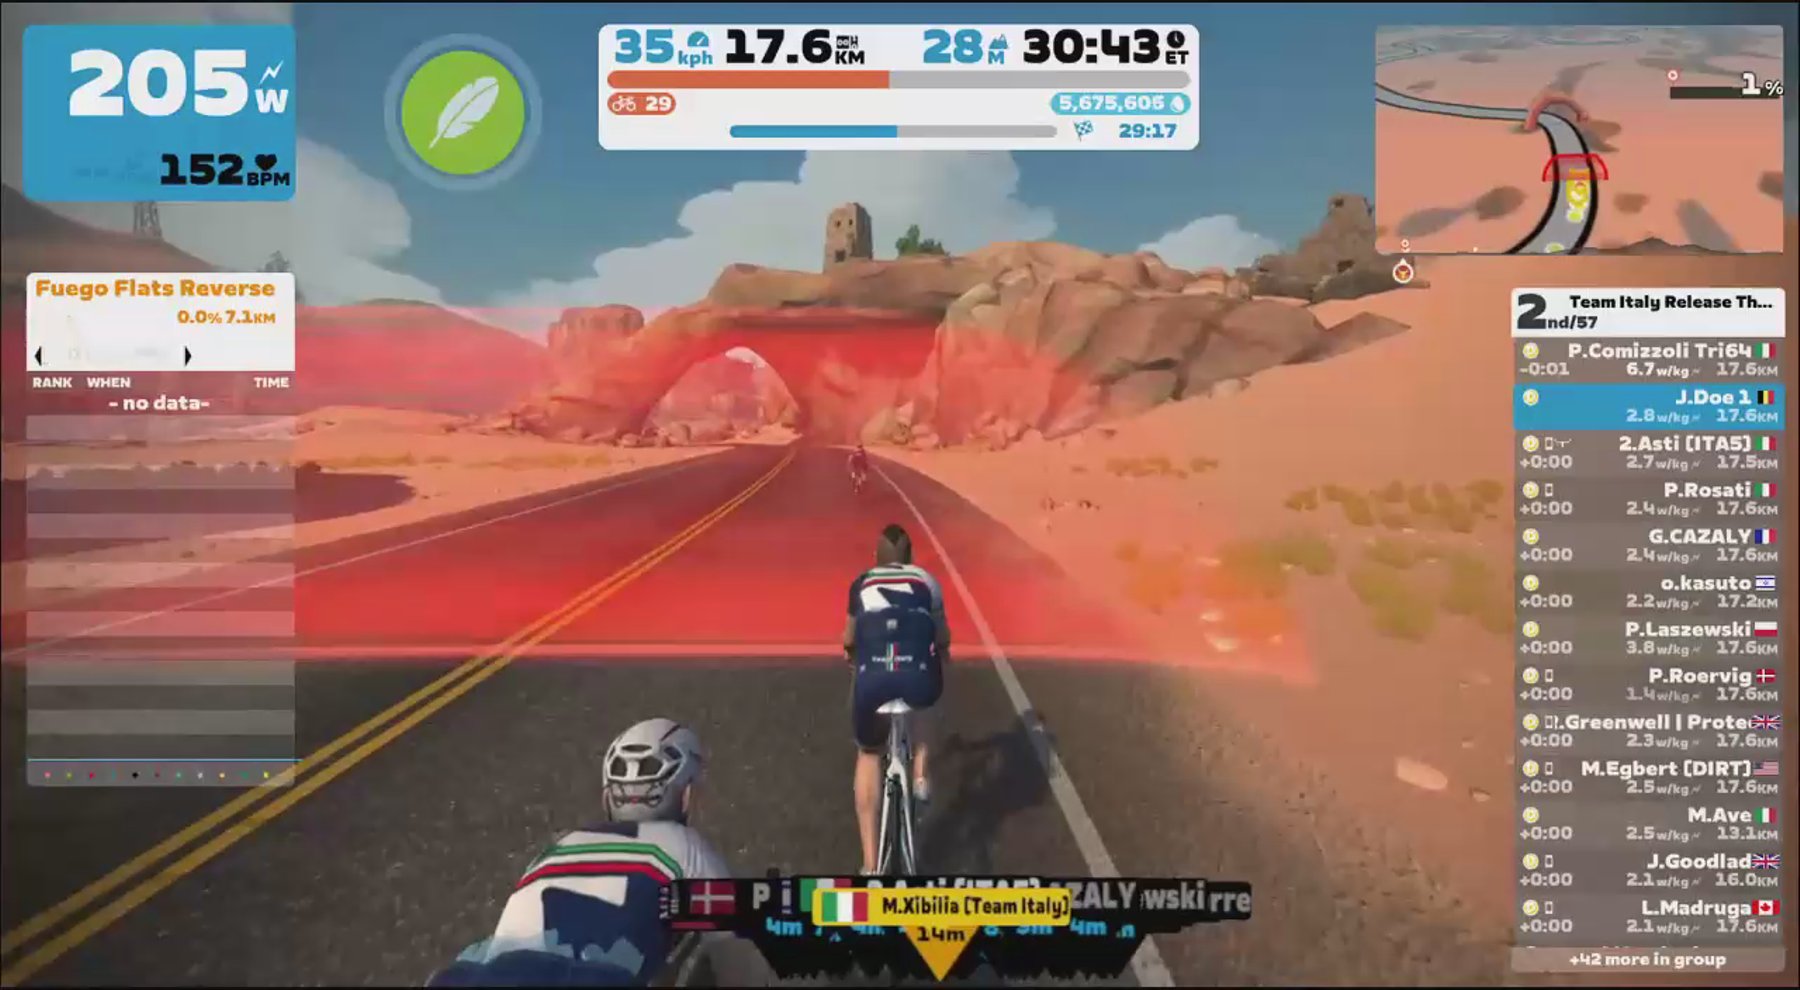 Zwift - Group Ride: Team Italy Release The Chain Ride x 2 (D) on Tempus Fugit in Watopia